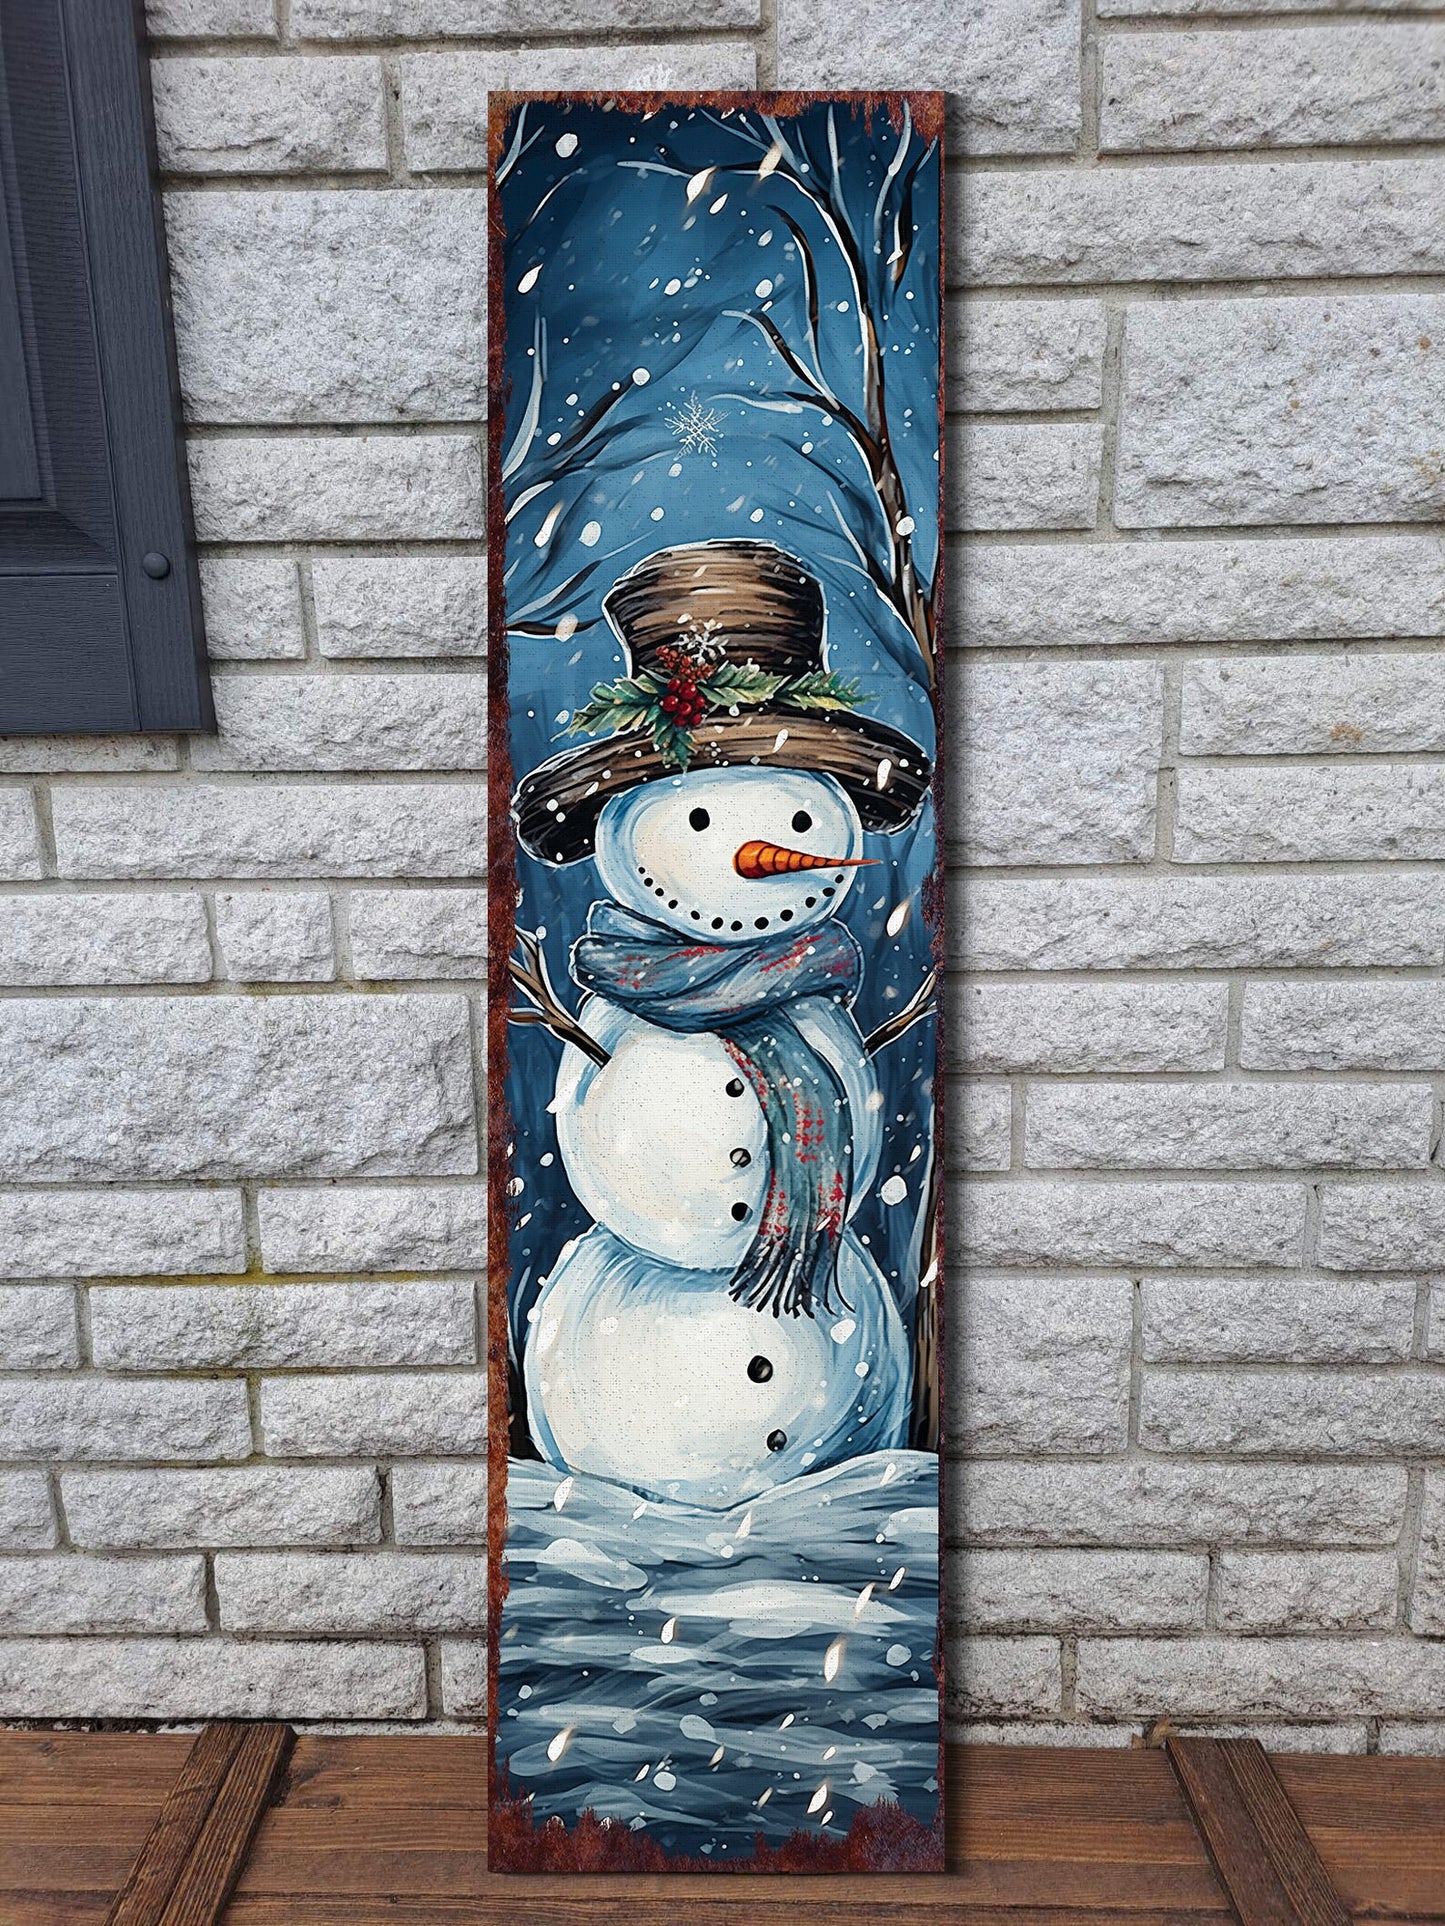 36in Oil Paint Style Snowman Christmas Porch Sign - Front PorchDecor Sign, Modern Farmhouse Wall Decor, Vintage Christmas Decor for Outdoor